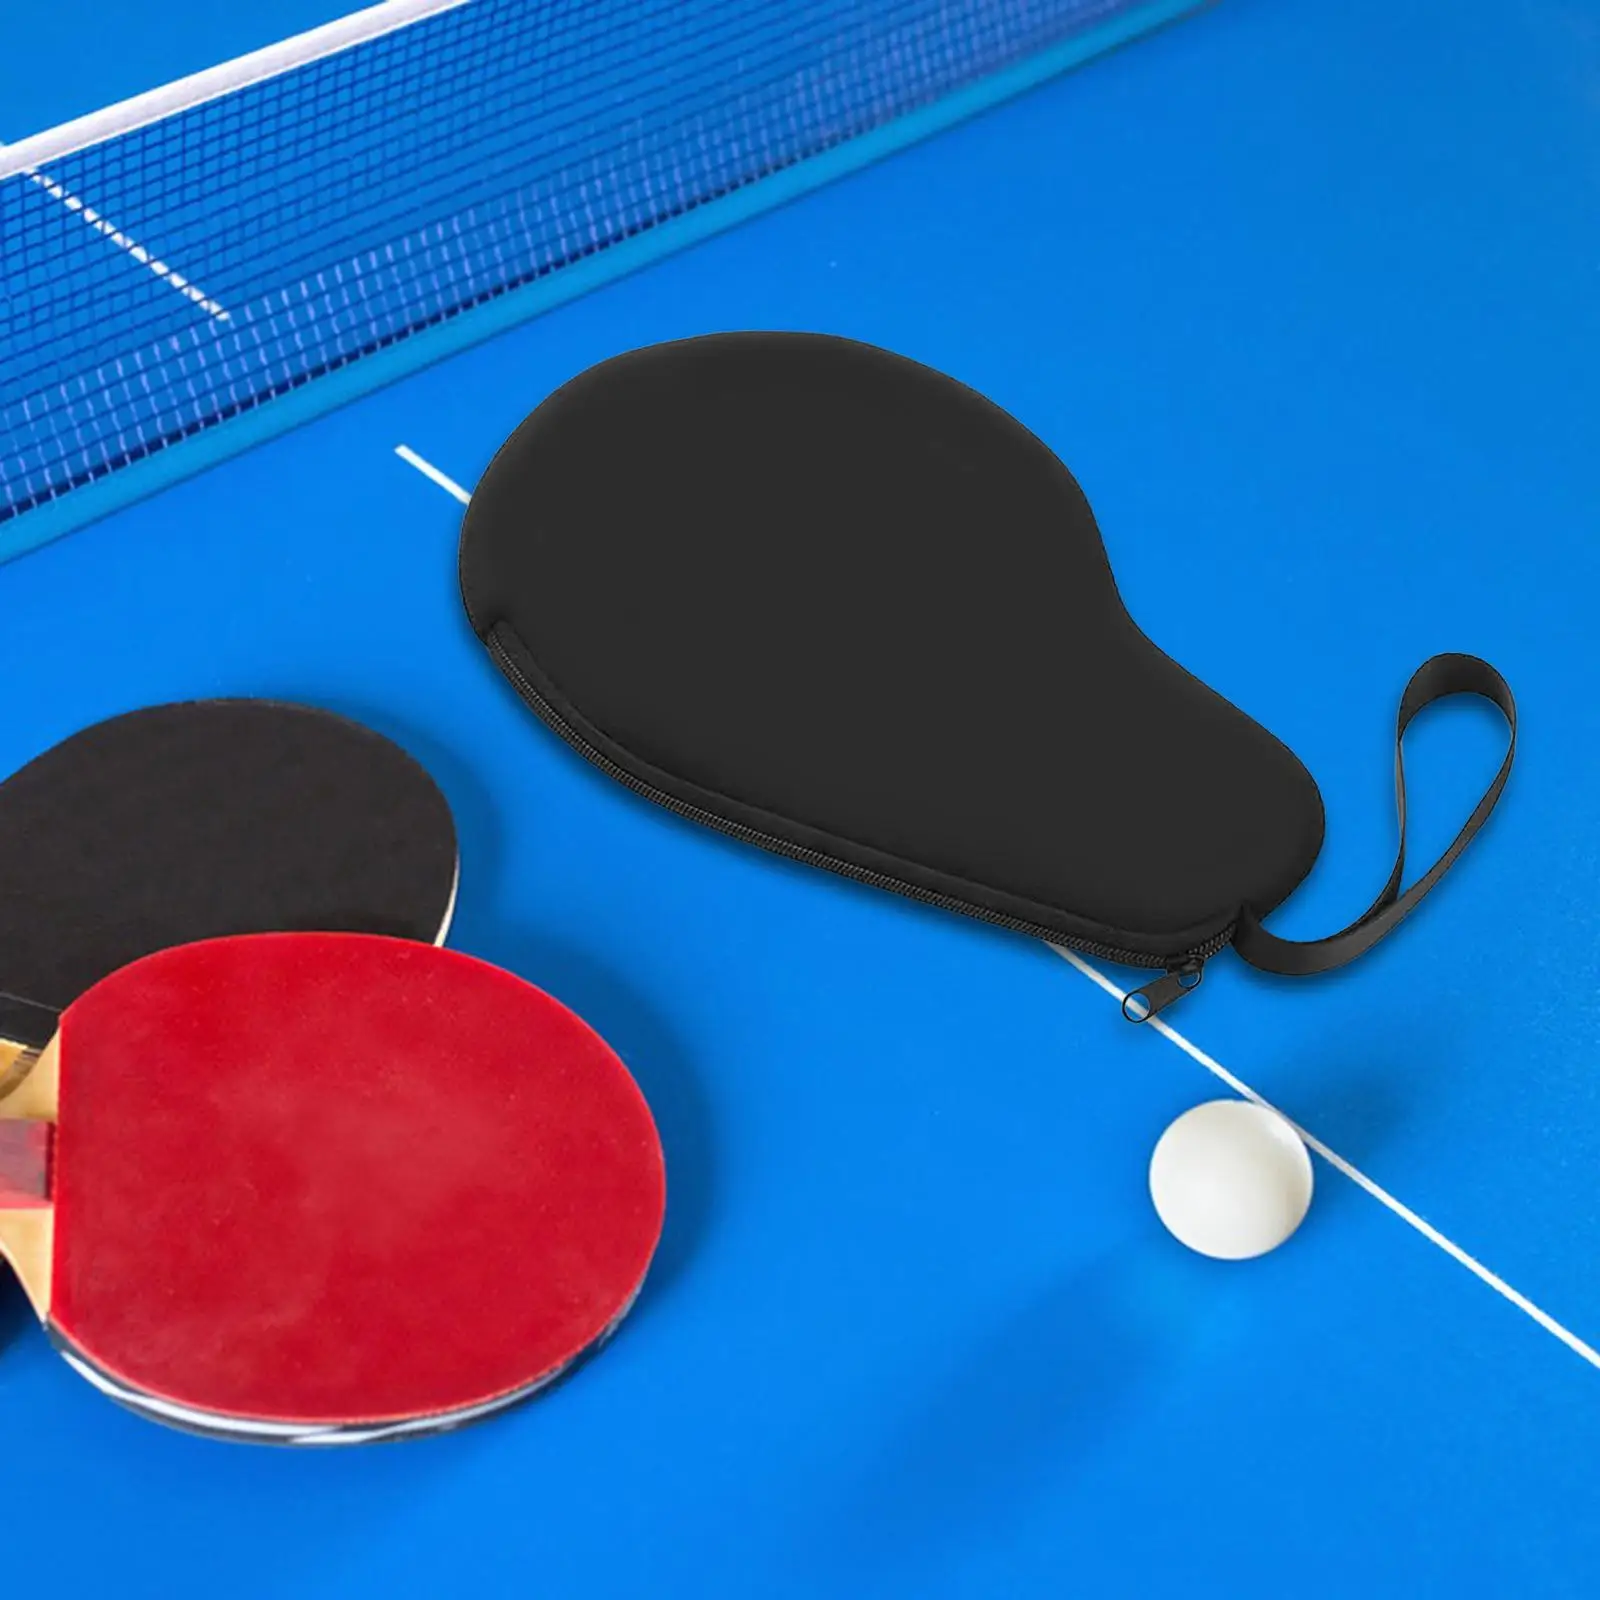 Ping Pong Paddle Case Shock Resistant Lightweight Protective Table Tennis Racket Bag for Youth Sportsman Competition Home